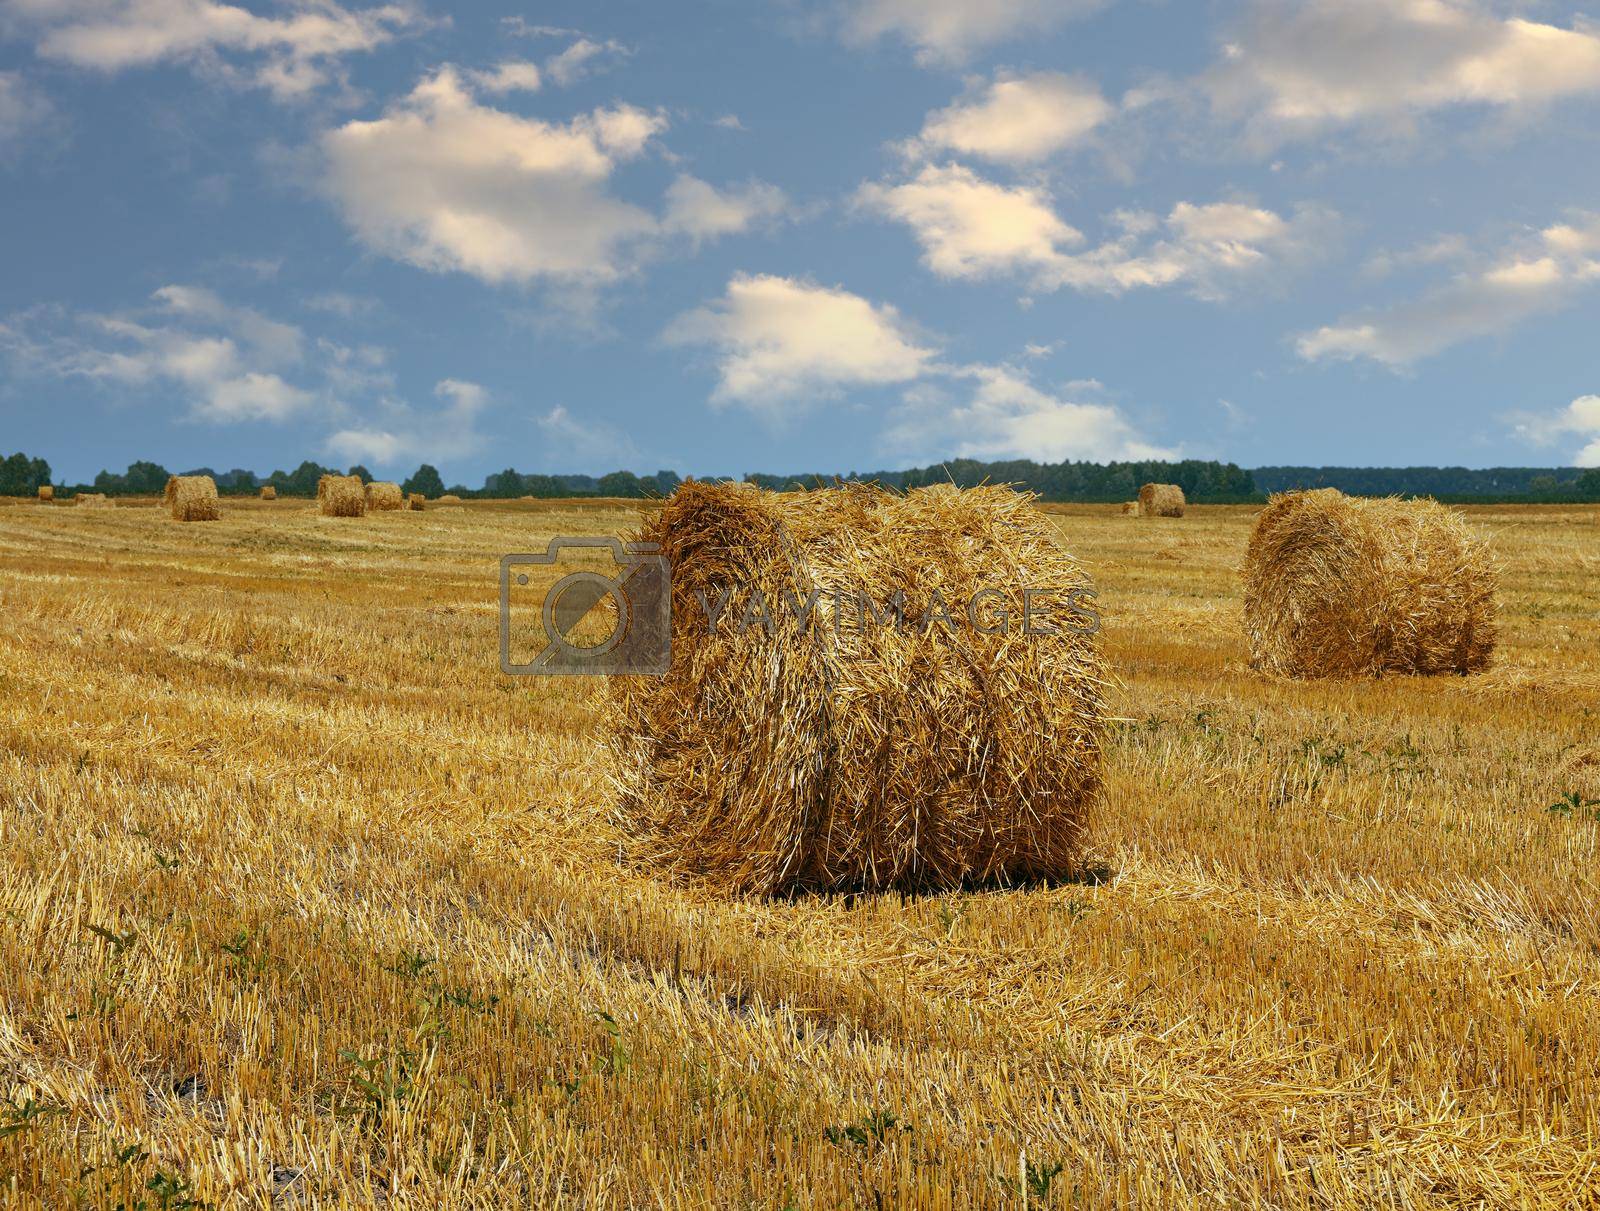 Royalty free image of Bales of straw in stubble field after harvesting by BreakingTheWalls